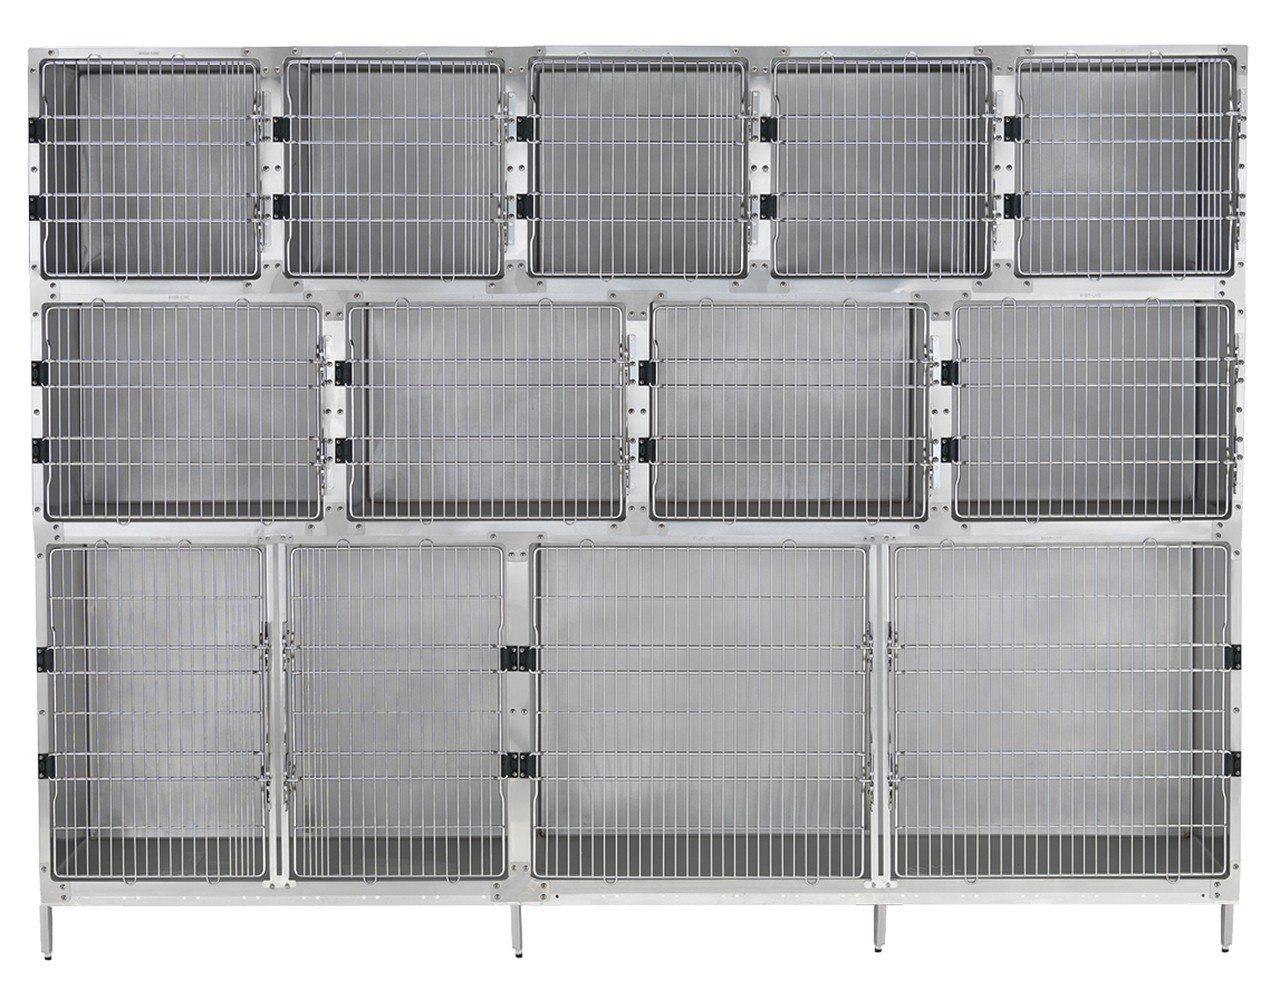 Shor-Line Stainless Steel 10' Cage Assembly - Model B